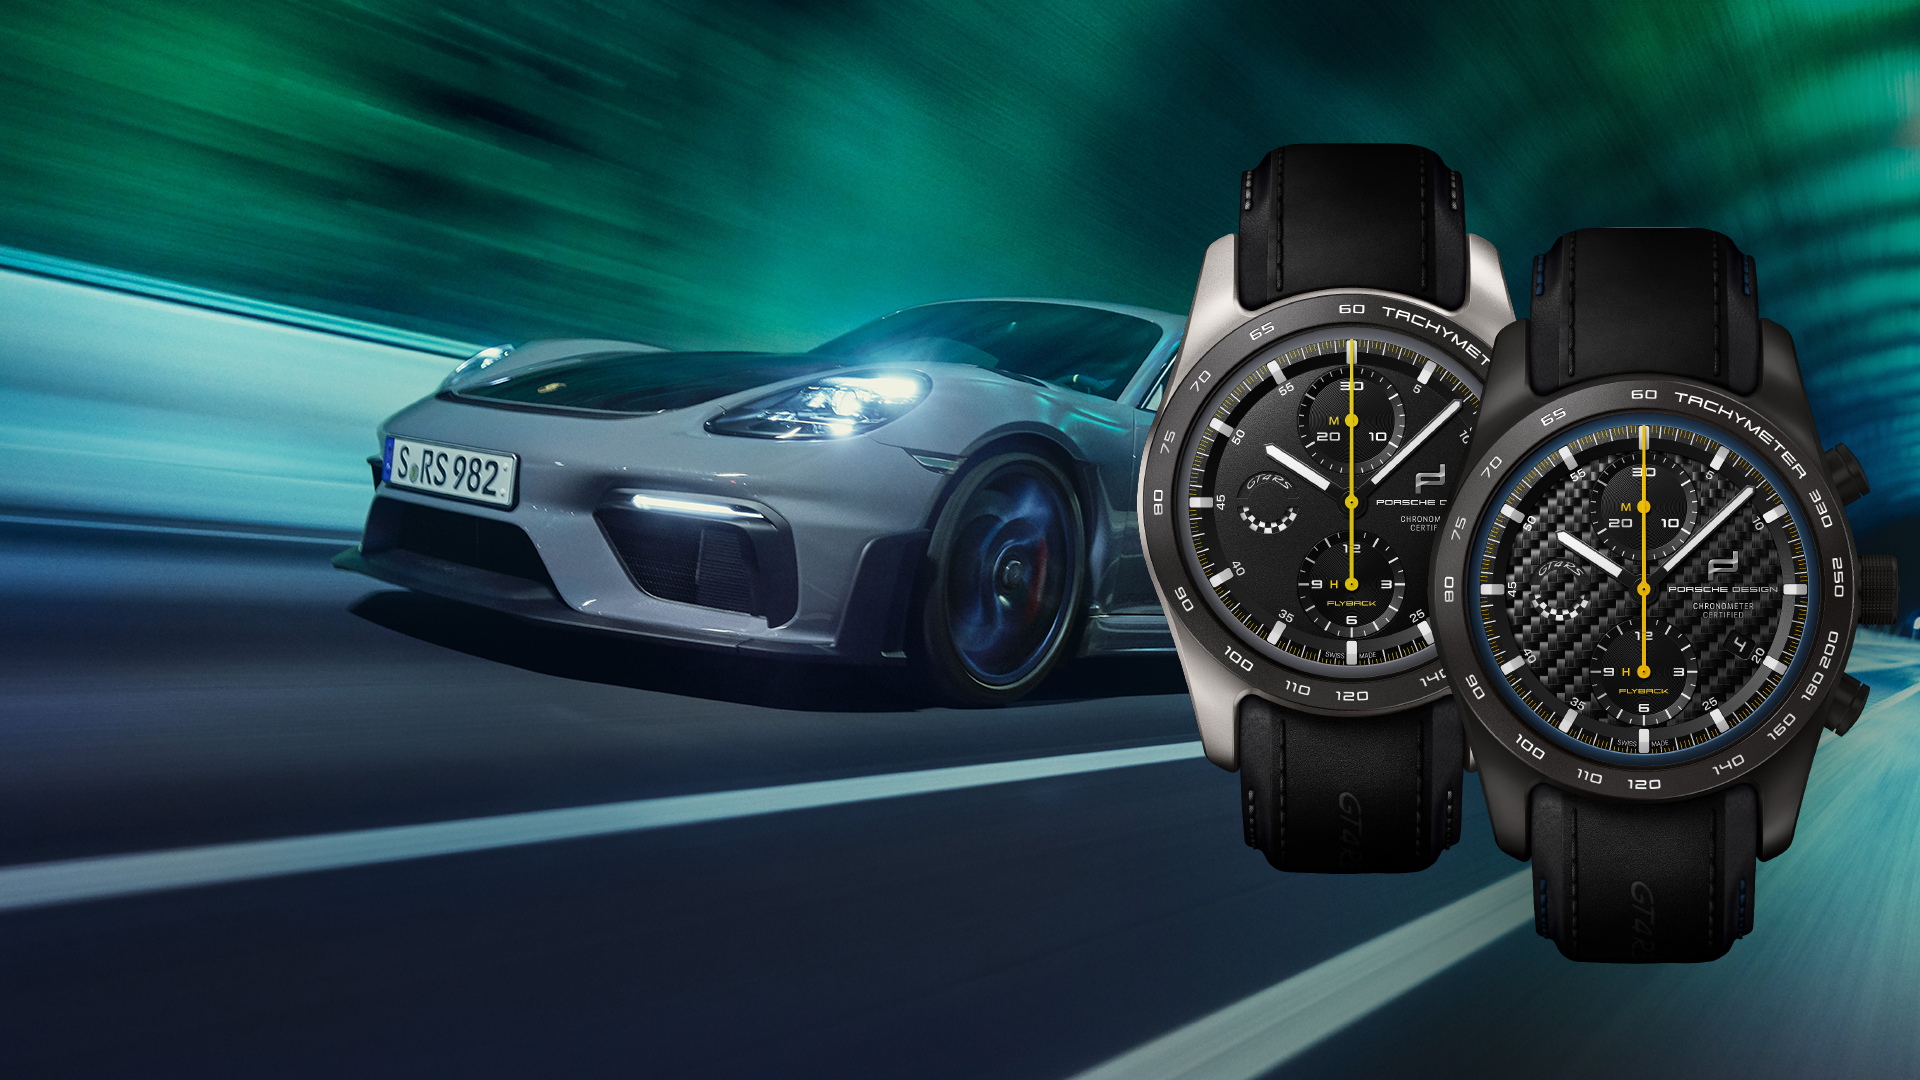 Introducing The Porsche Design Chronograph 1 Limited Edition Watches –  WristReview.com – Featuring Watch Reviews, Critiques, Reports & News